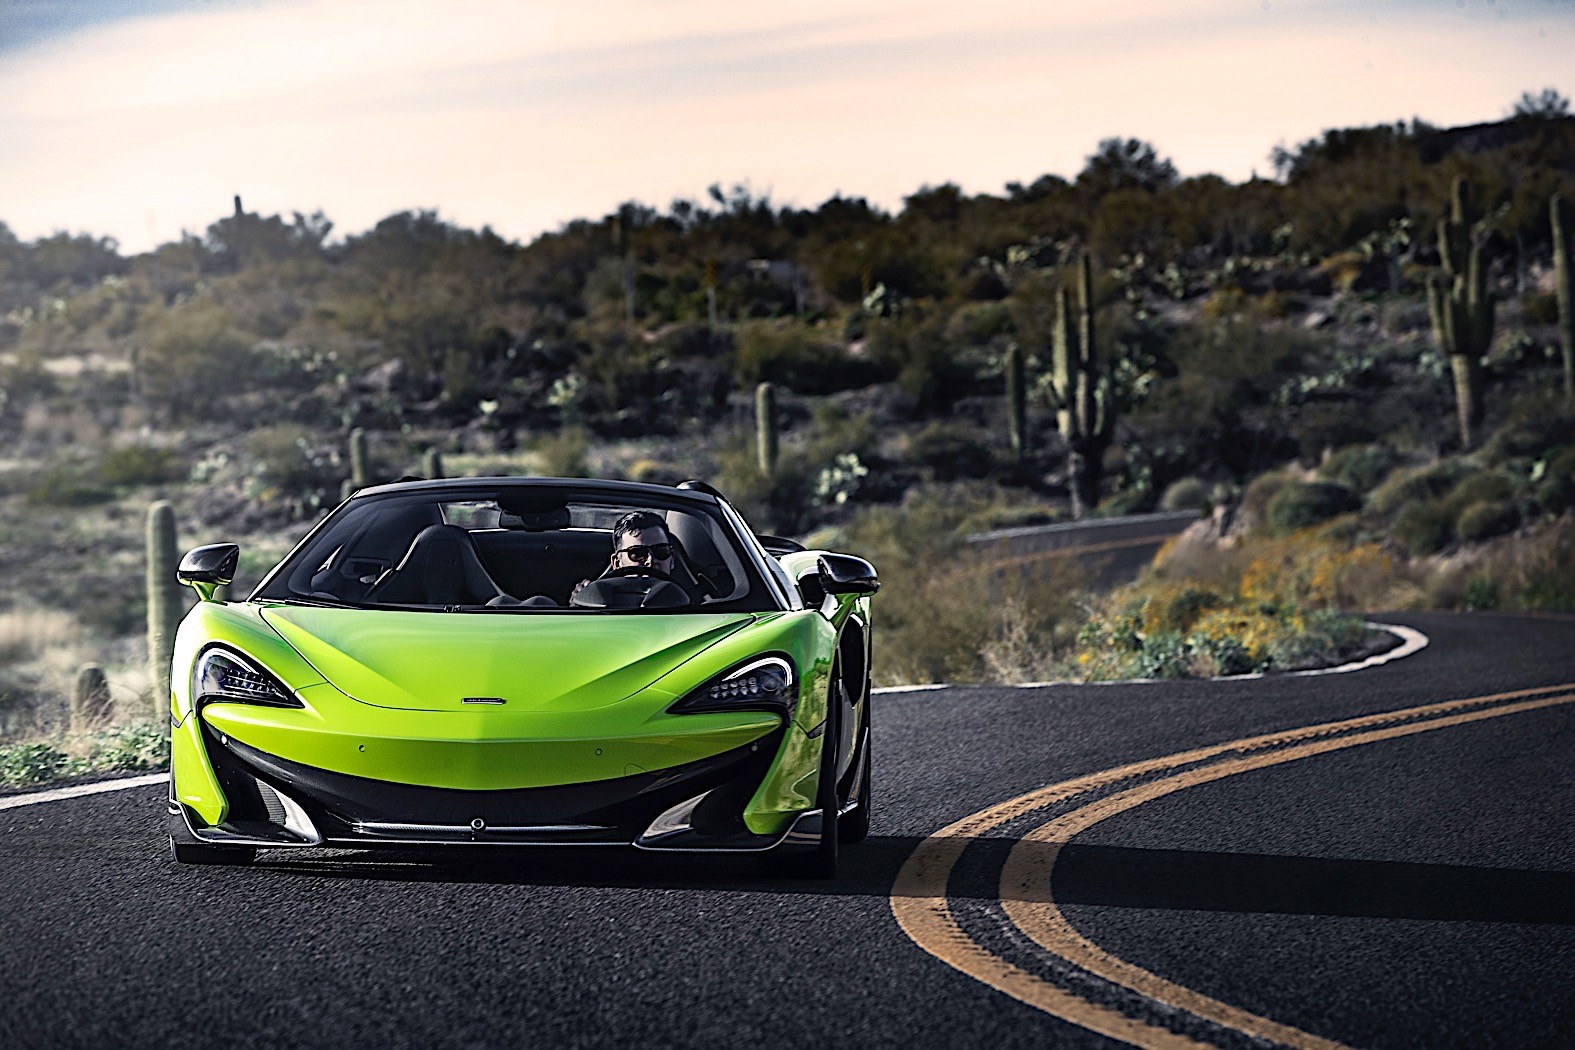 2020 mclaren 600lt spider sells in the us from 256500_1